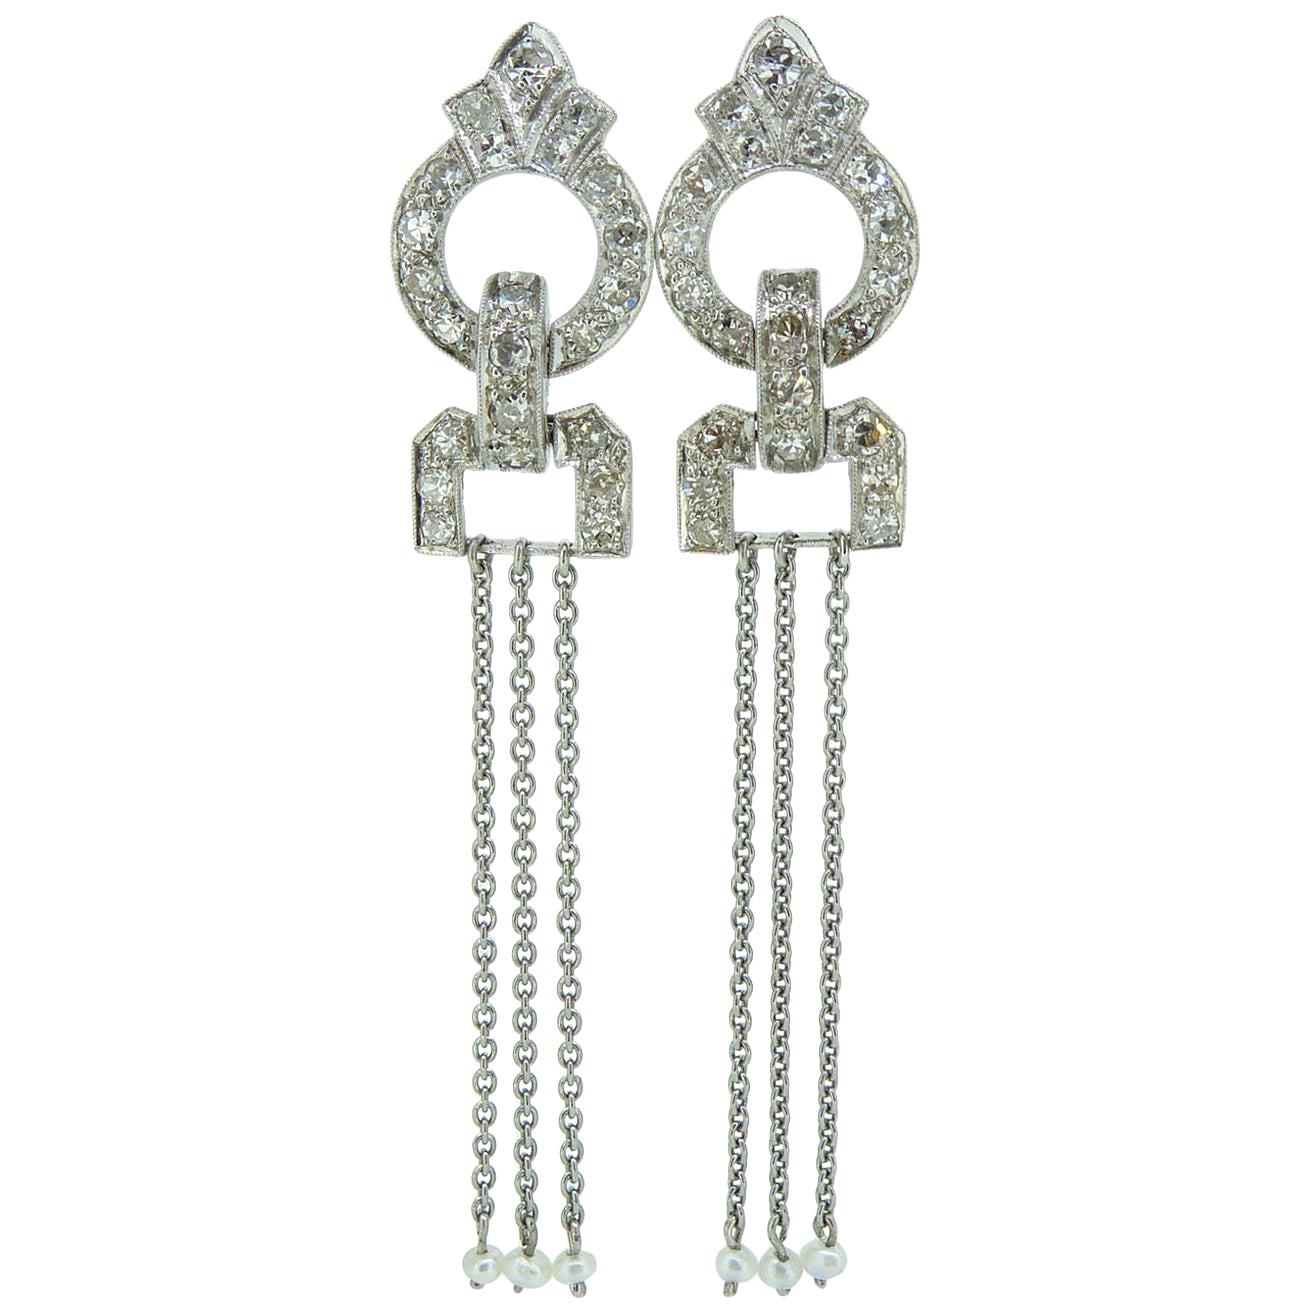 Art Deco Style Earrings Conversion, Diamond and Pearl Chandelier Drops, Platinum